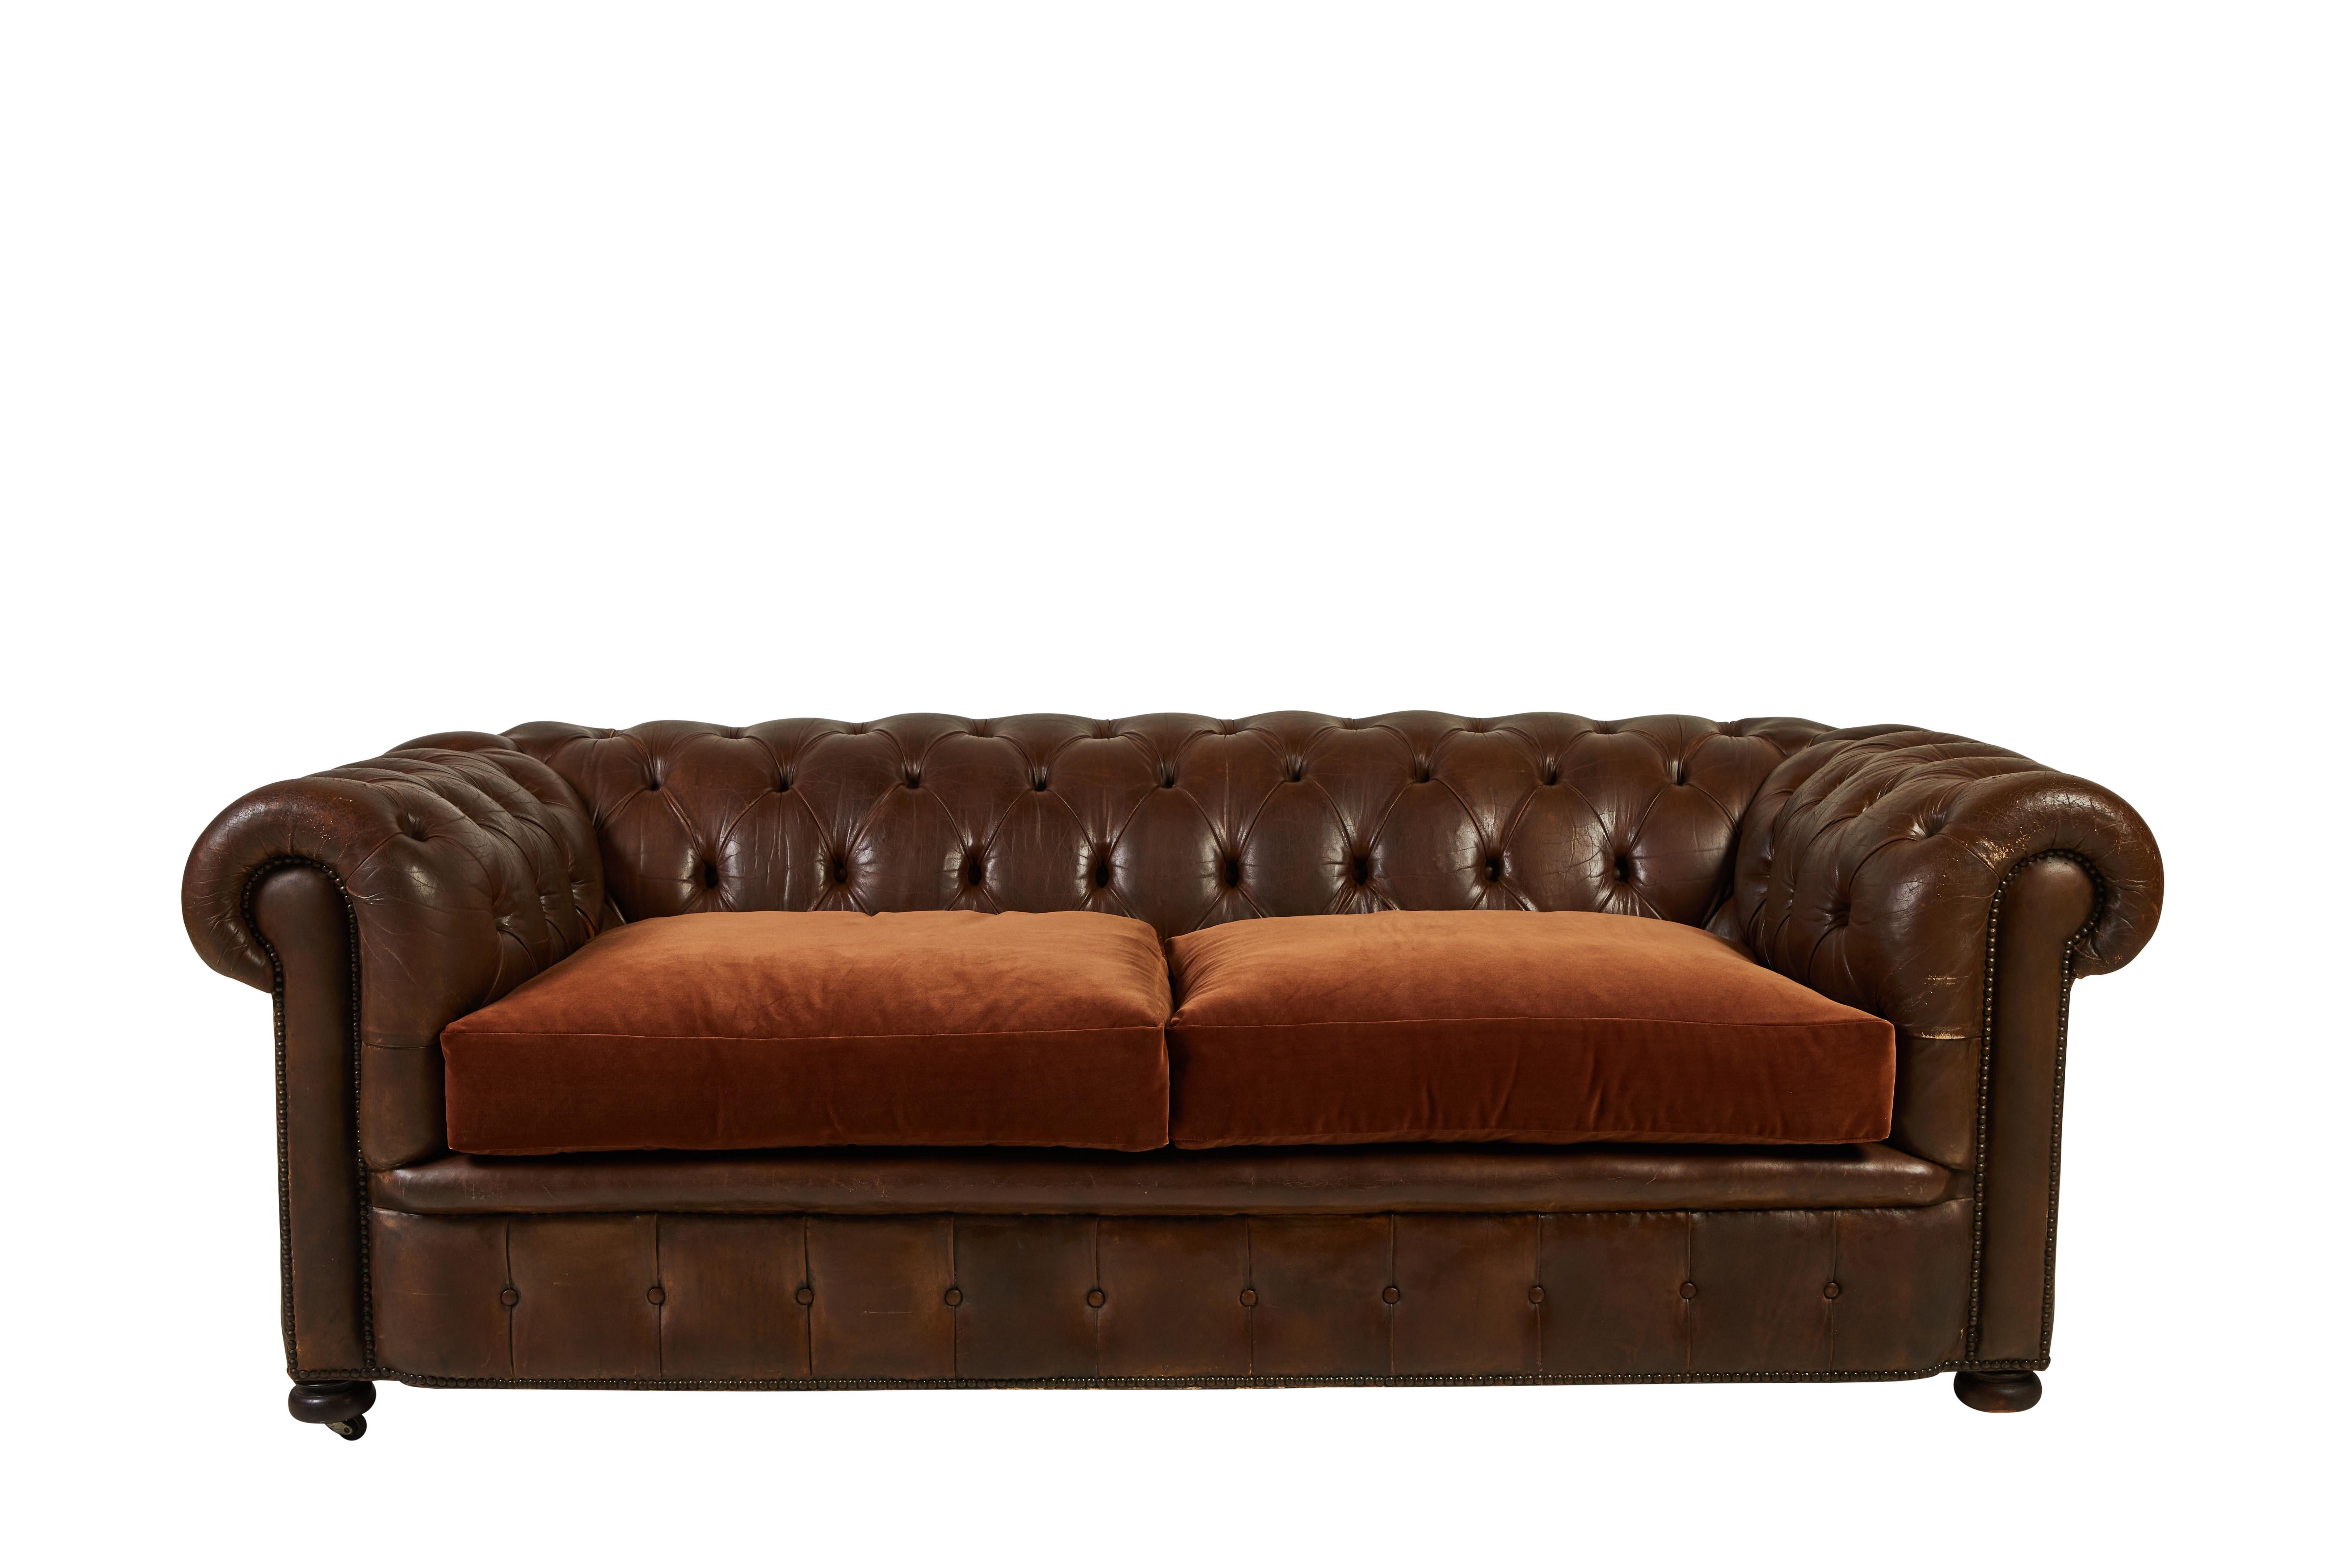 Mid-20th Century Rolled Arm Leather Chesterfield Sofa